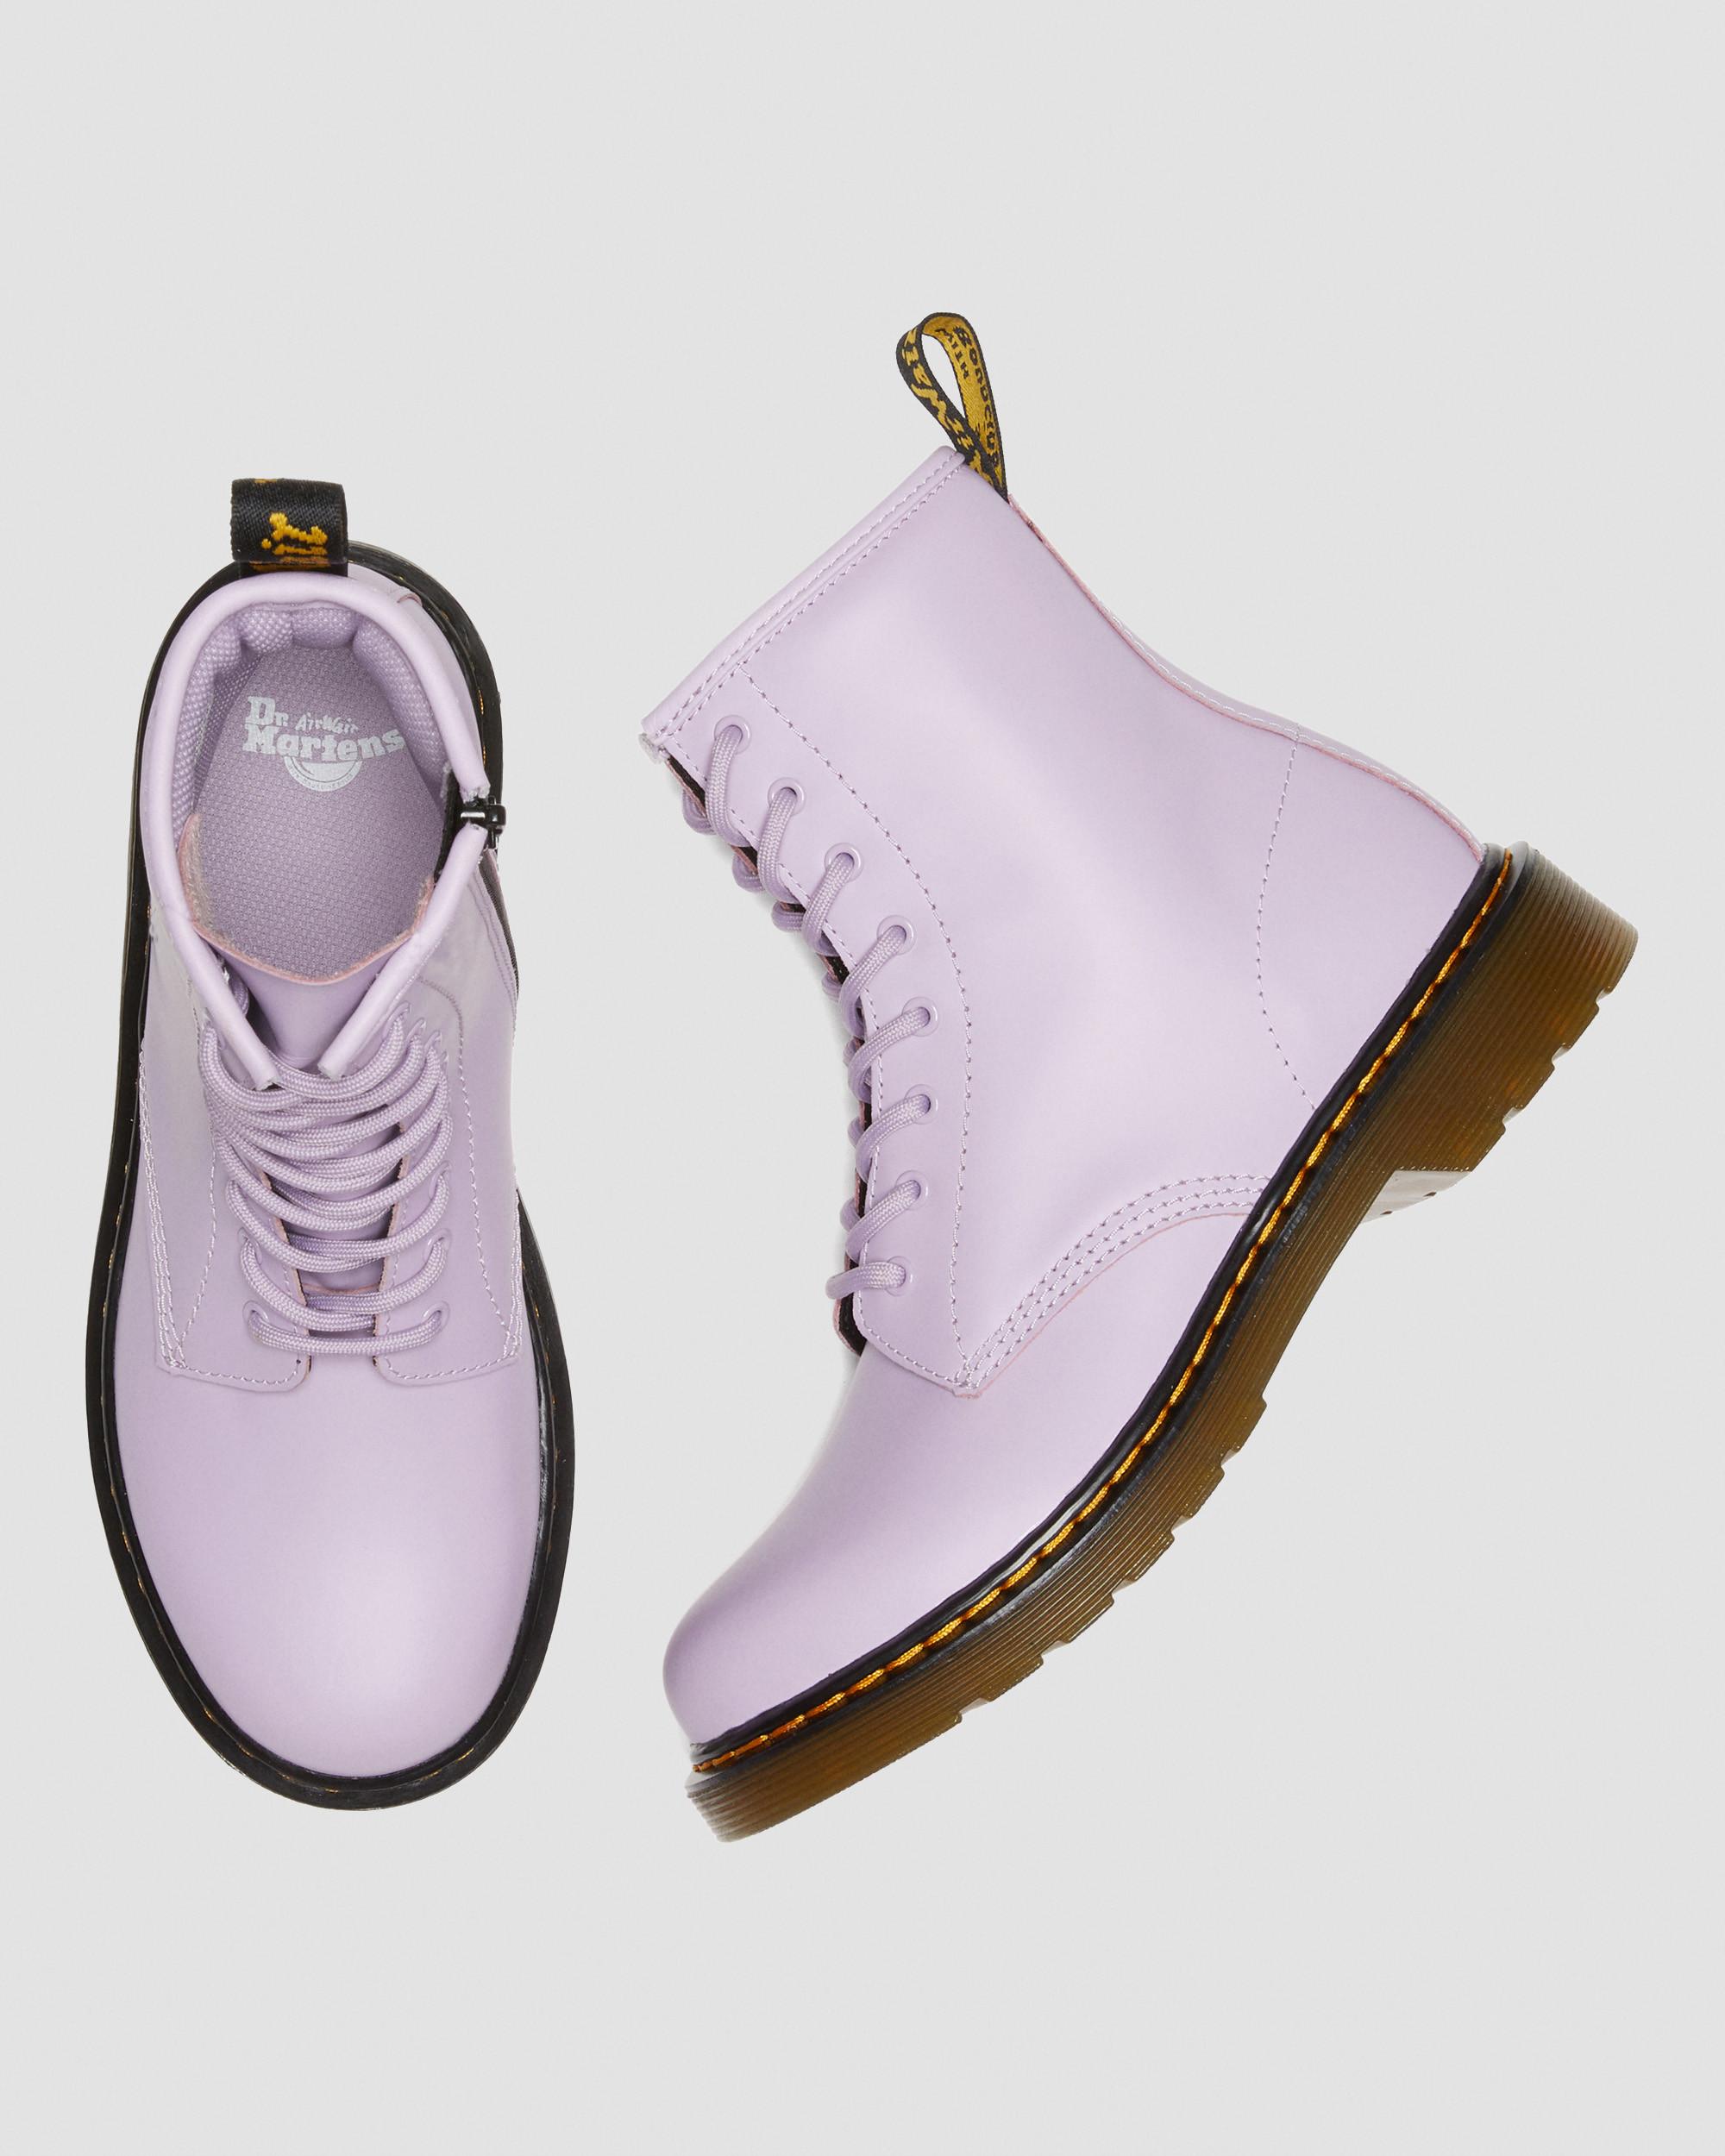 Lace Leather | in Youth Dr. 1460 Up Martens Lilac Romario Boots